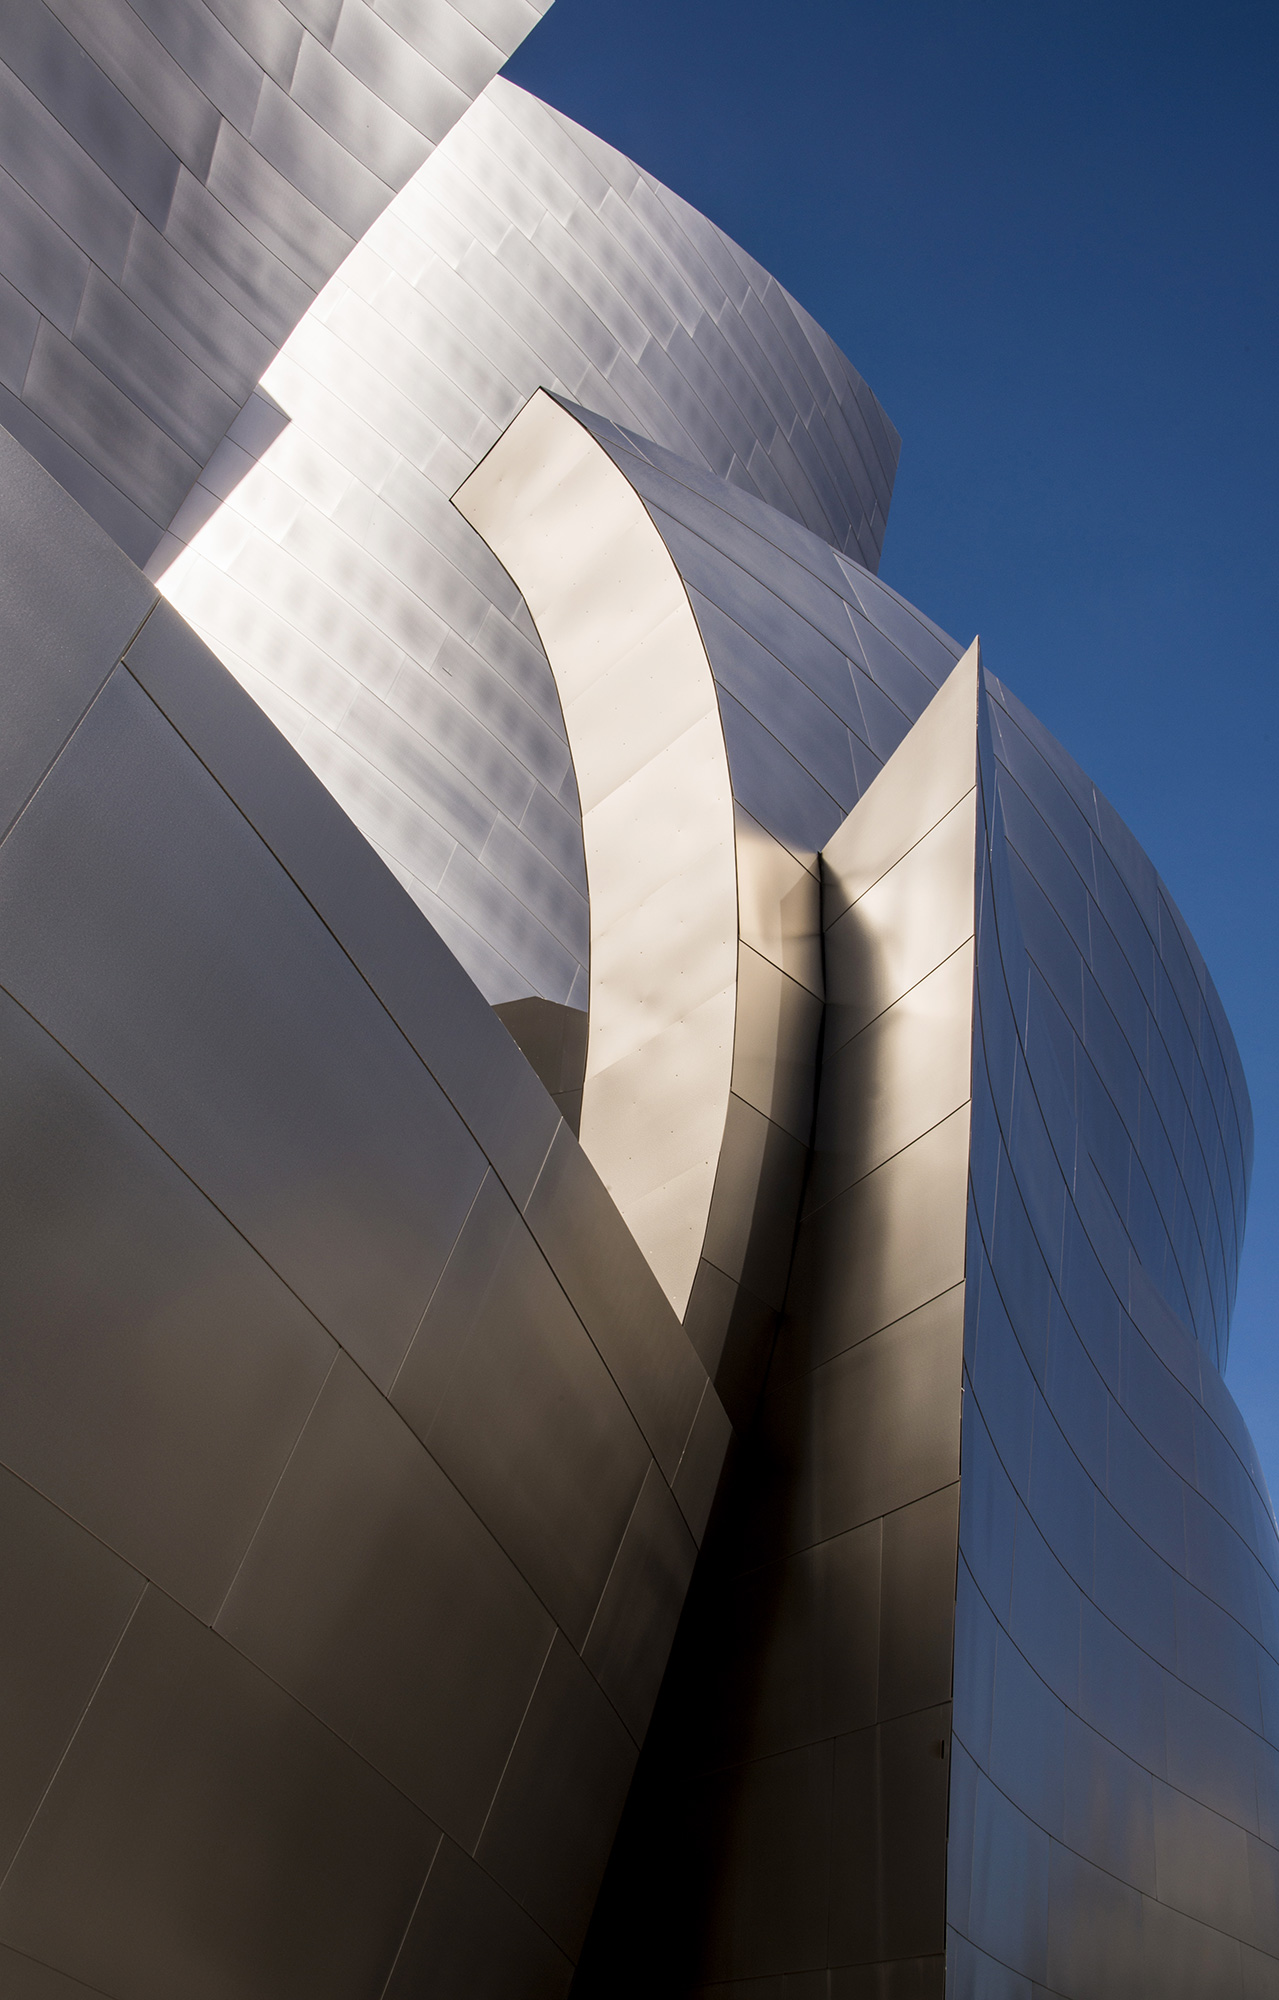 Walt Disney Concert Hall in Los Angeles, by architect Frank Gehry